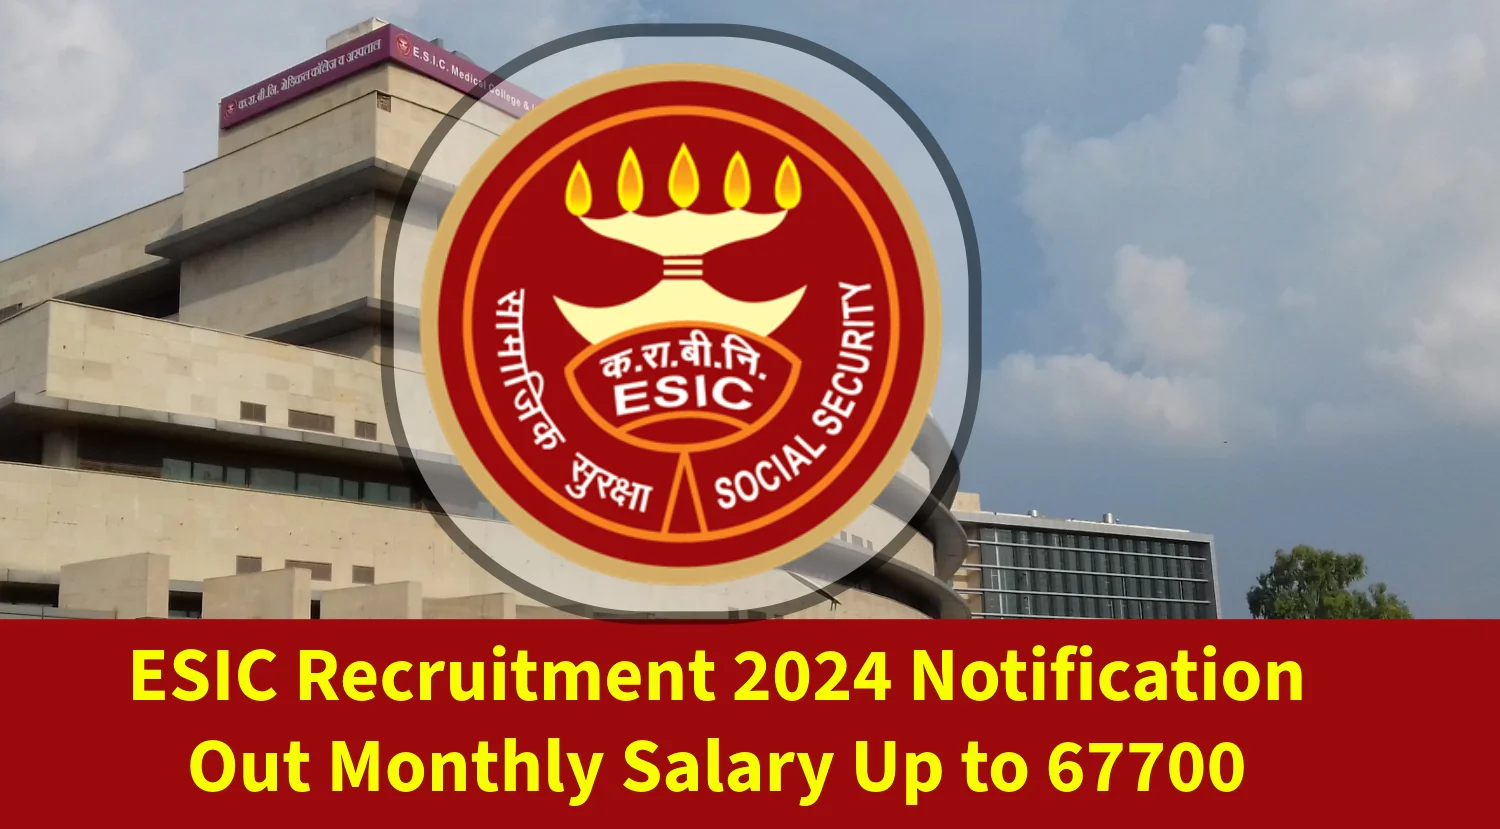 ESIC Recruitment 2024 Notification Out Monthly Salary Up to 67700